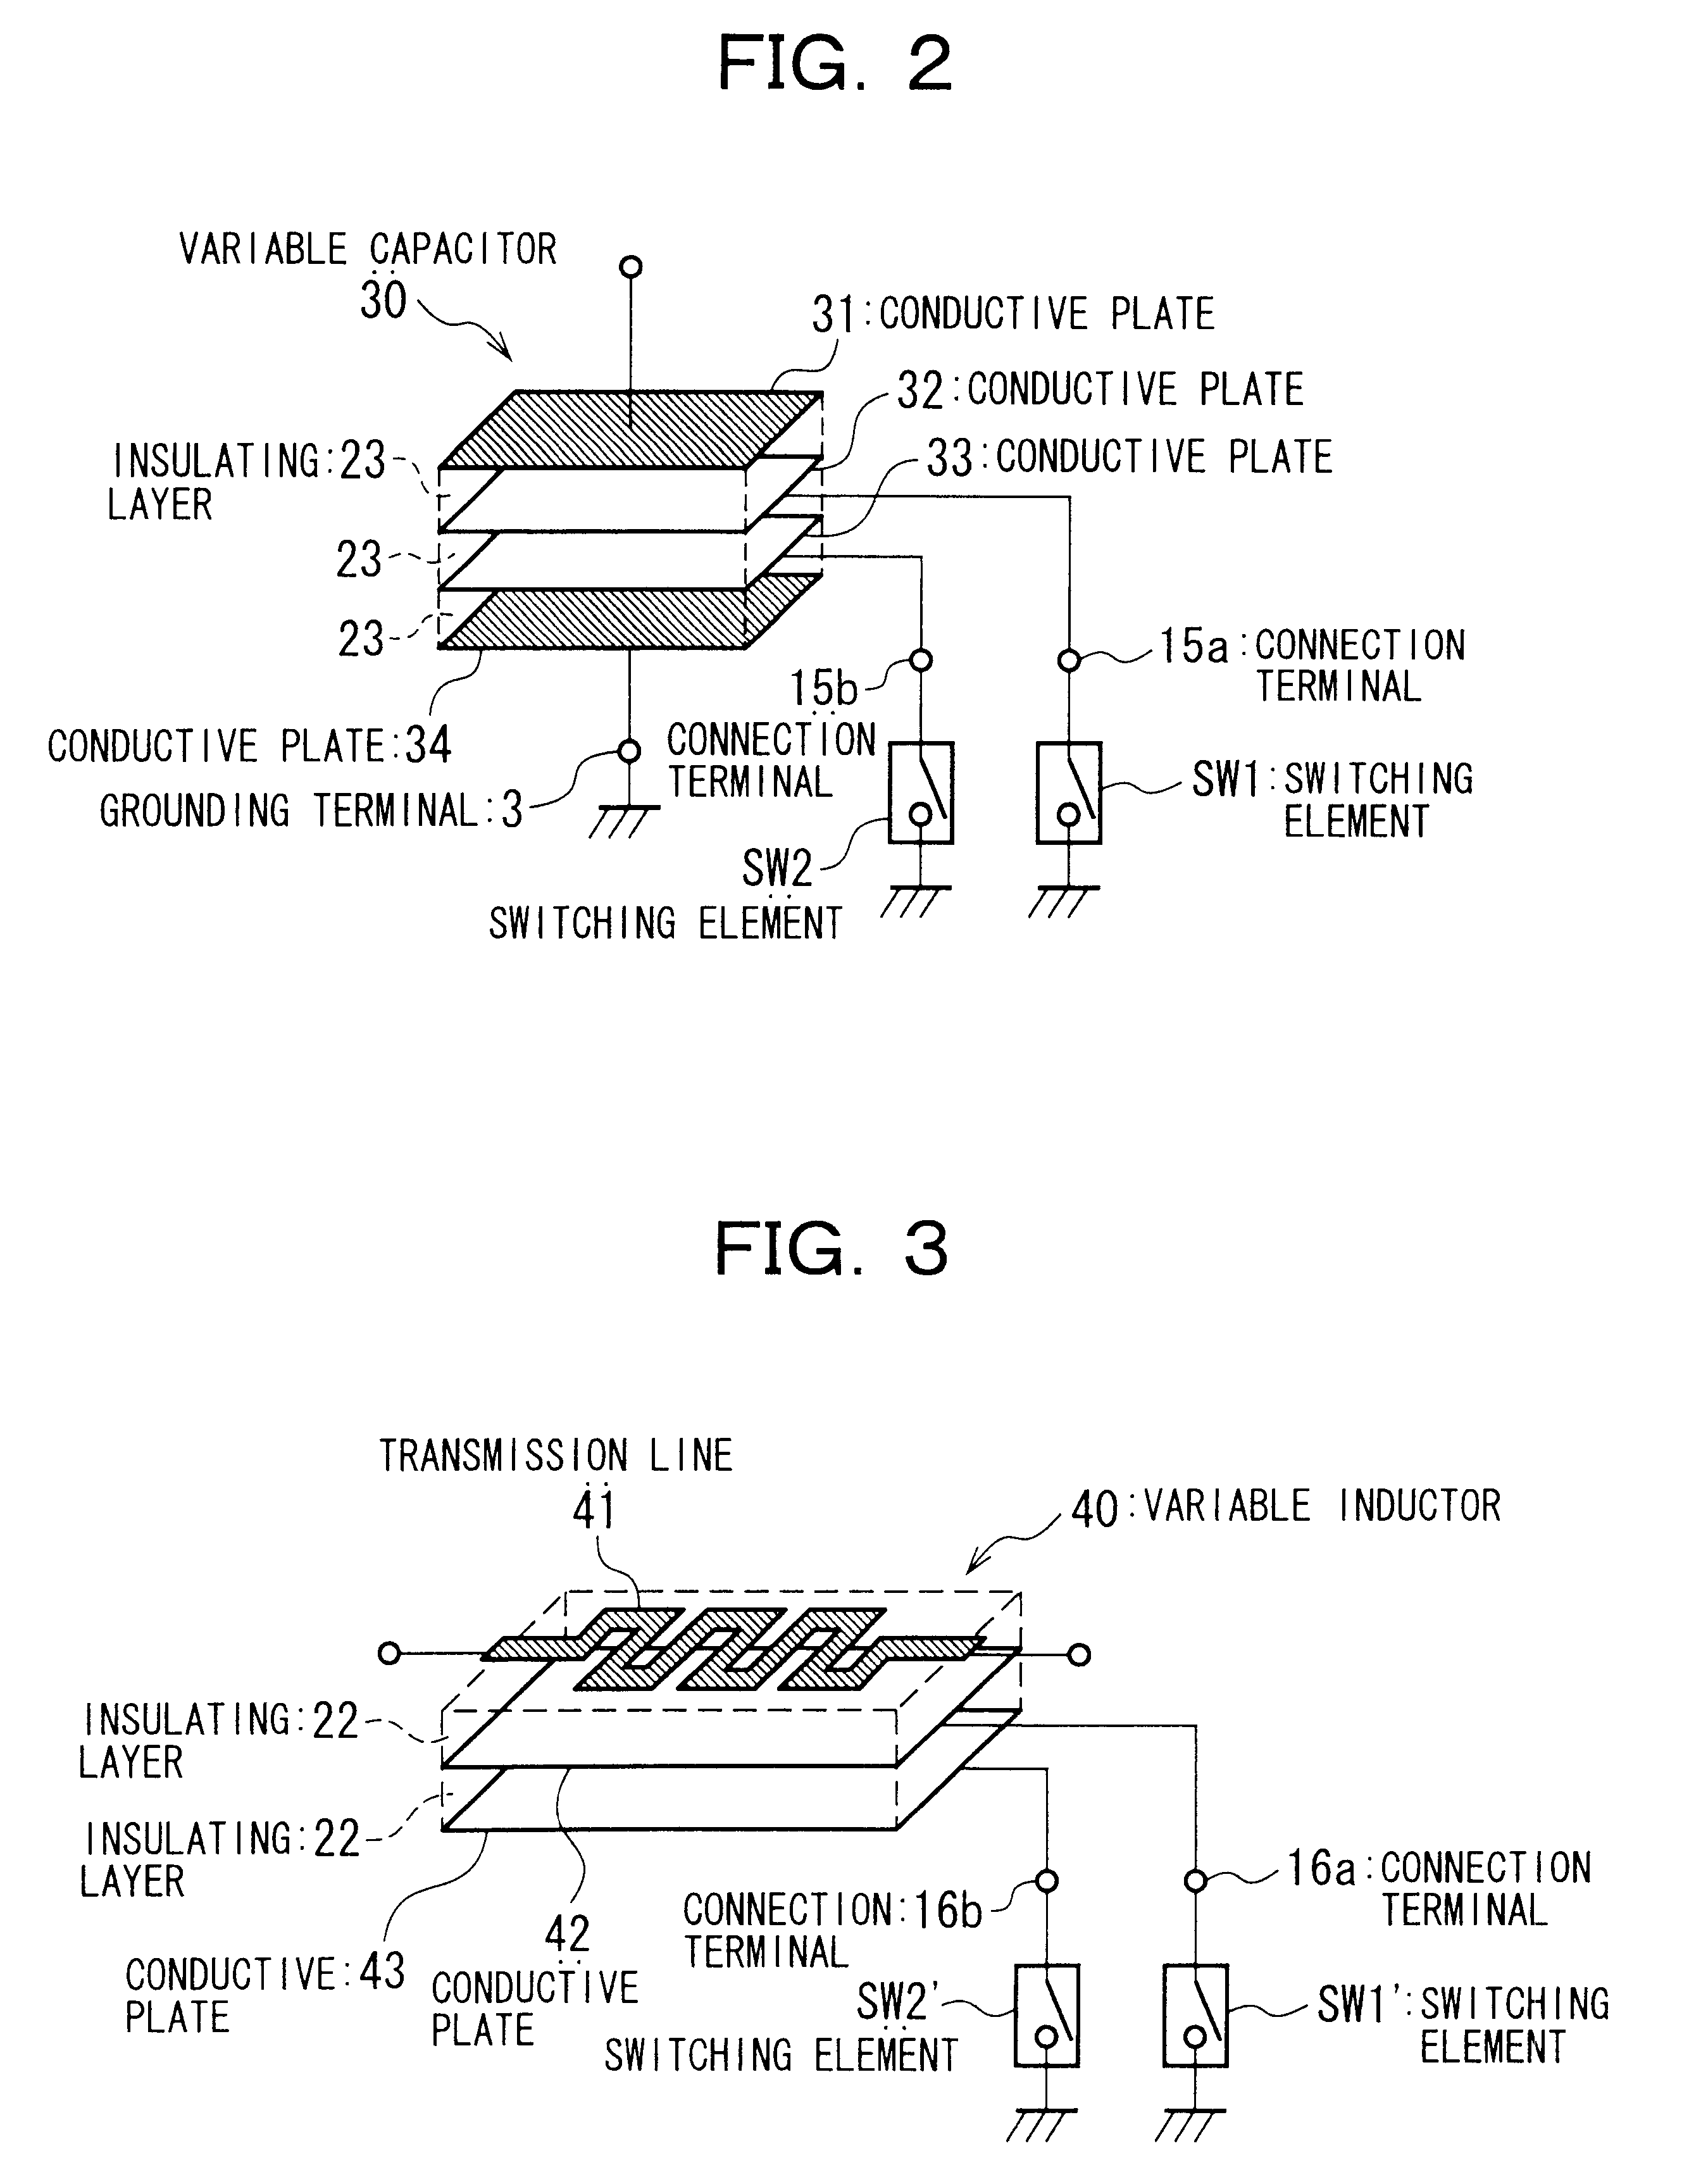 Variable capacitor and a variable inductor